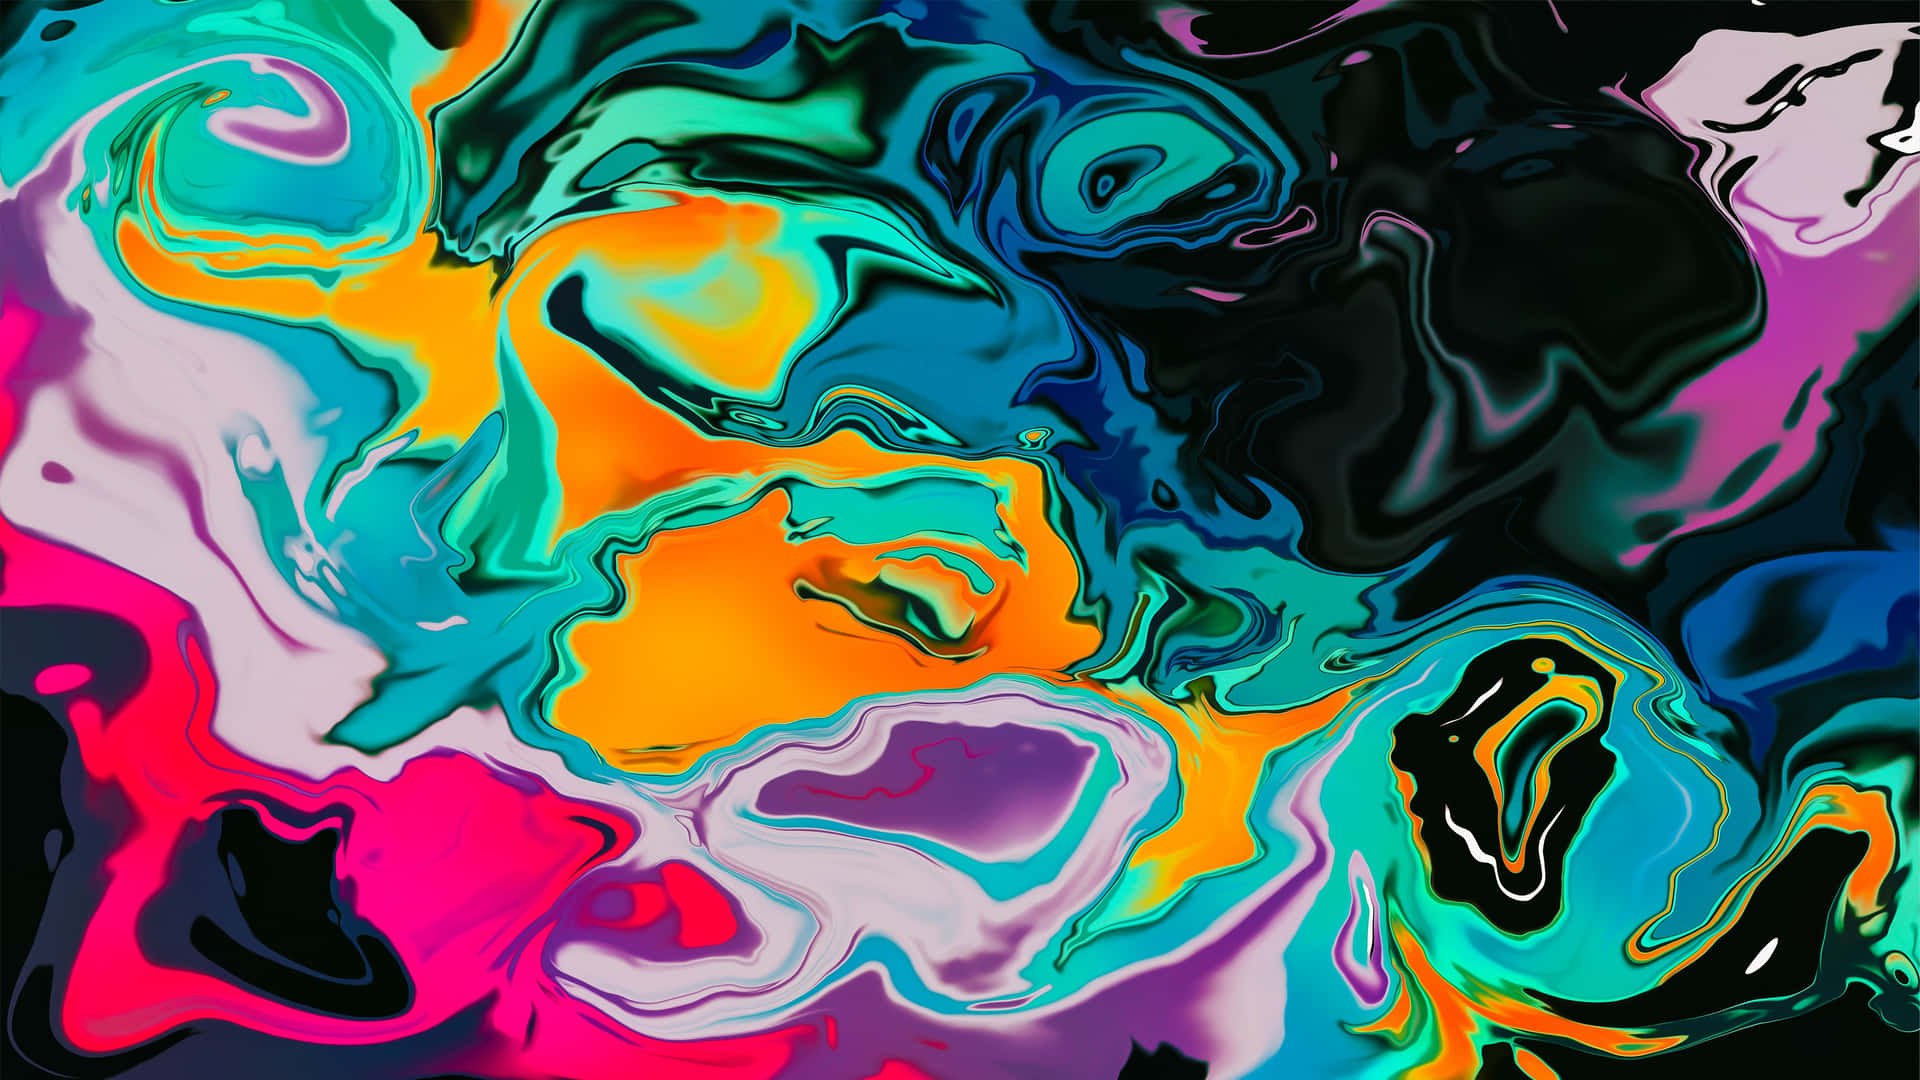 Abstract Marble 4K Painting Wallpaper